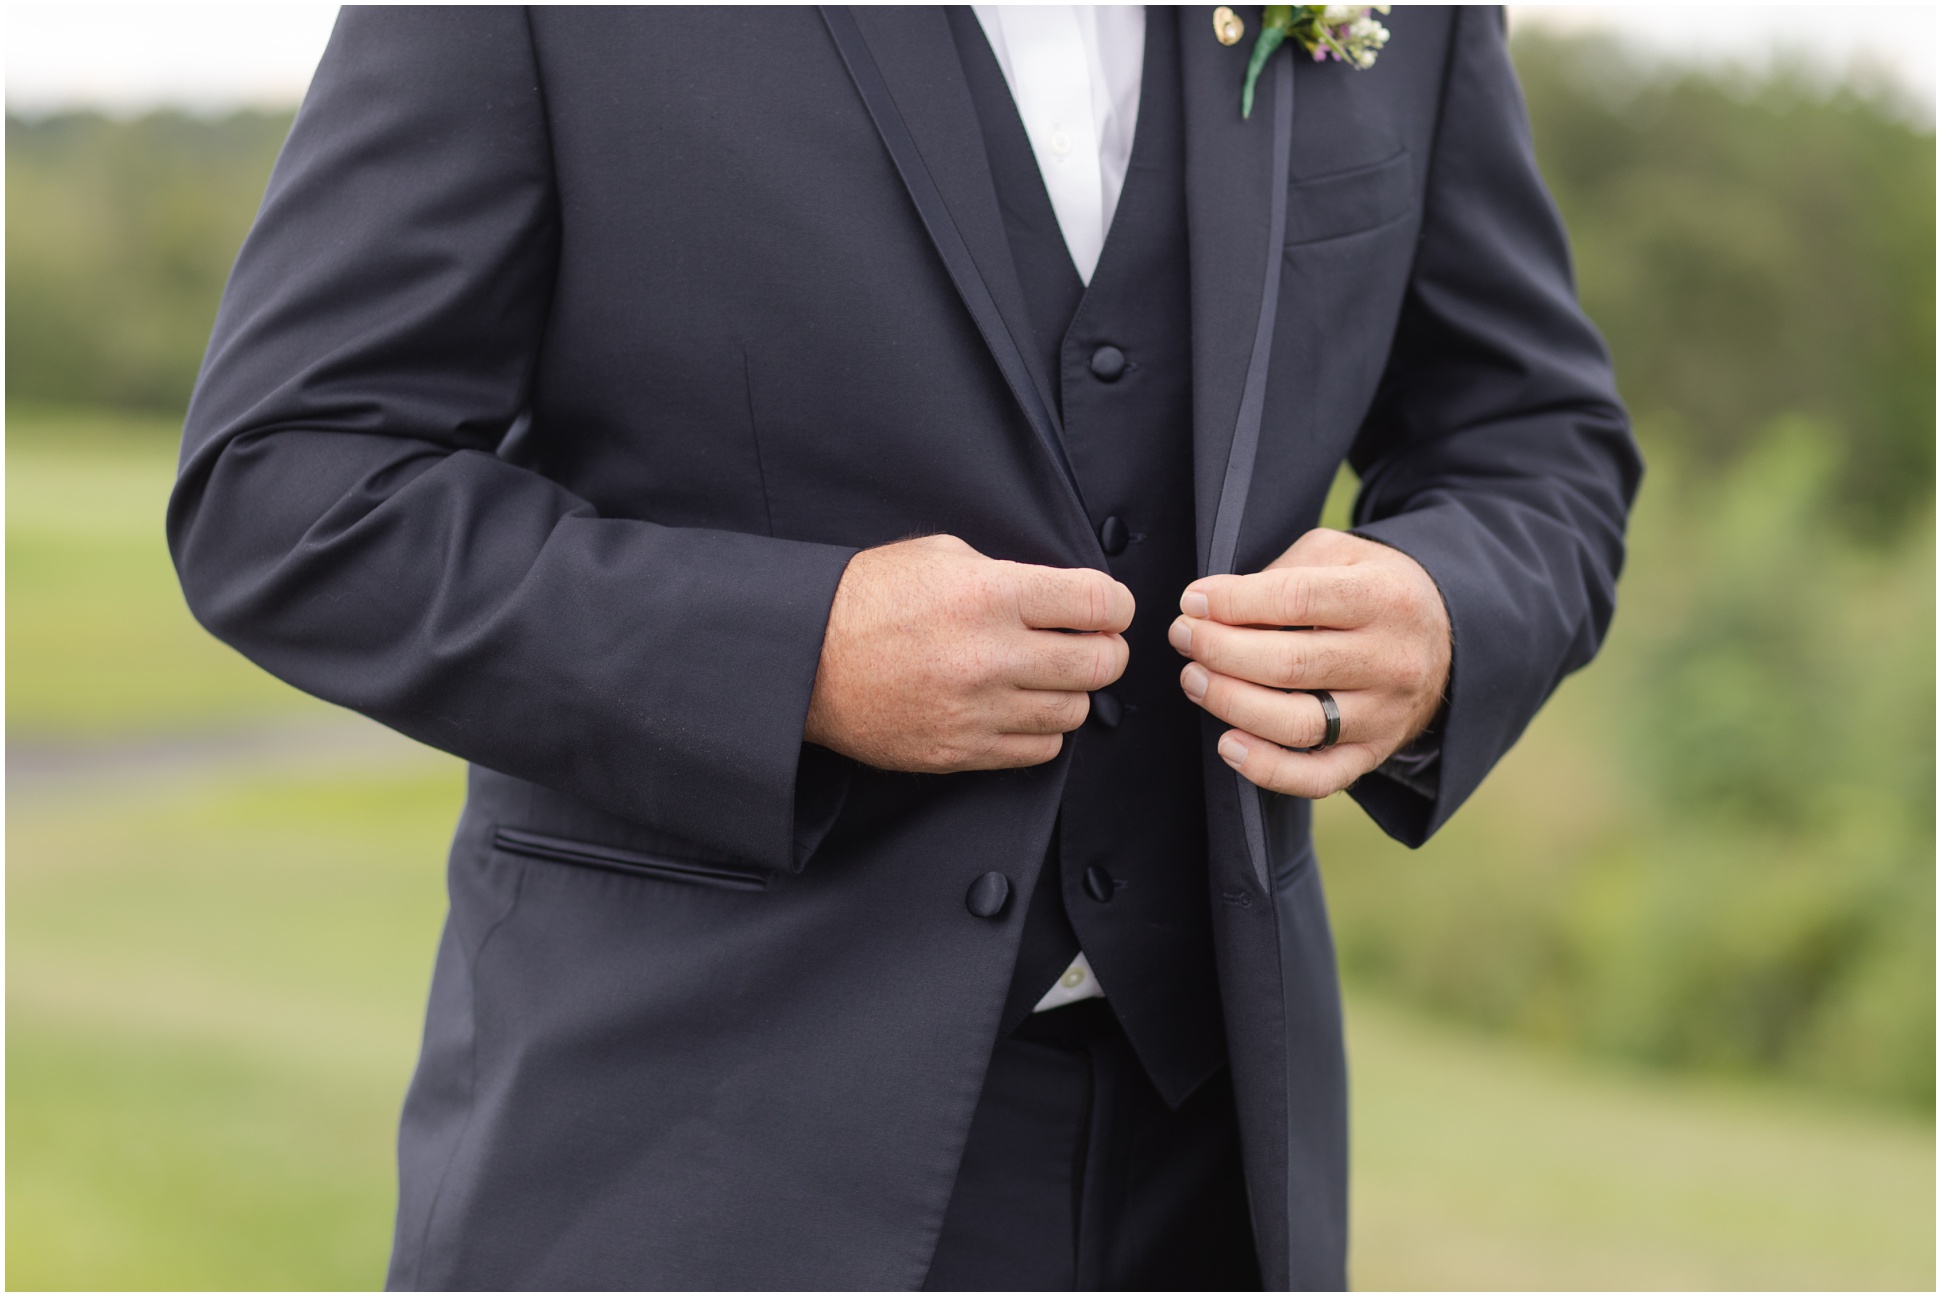 The groom buttoning up his jacket